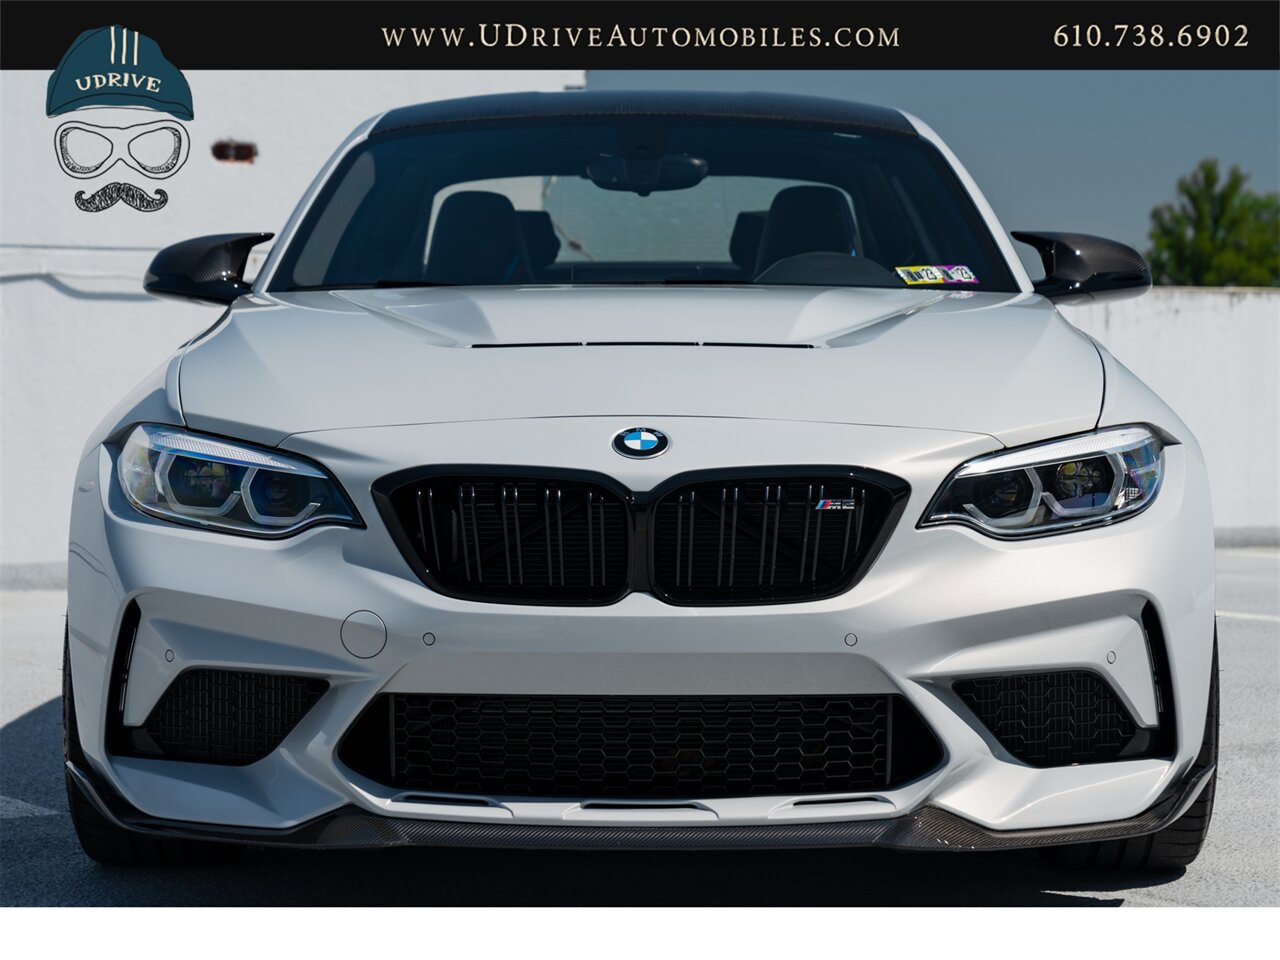 2020 BMW M2 CS  M2 CS 6 Speed Manual 2k Miles Full Body PPF Factory Warranty until 2025 - Photo 12 - West Chester, PA 19382